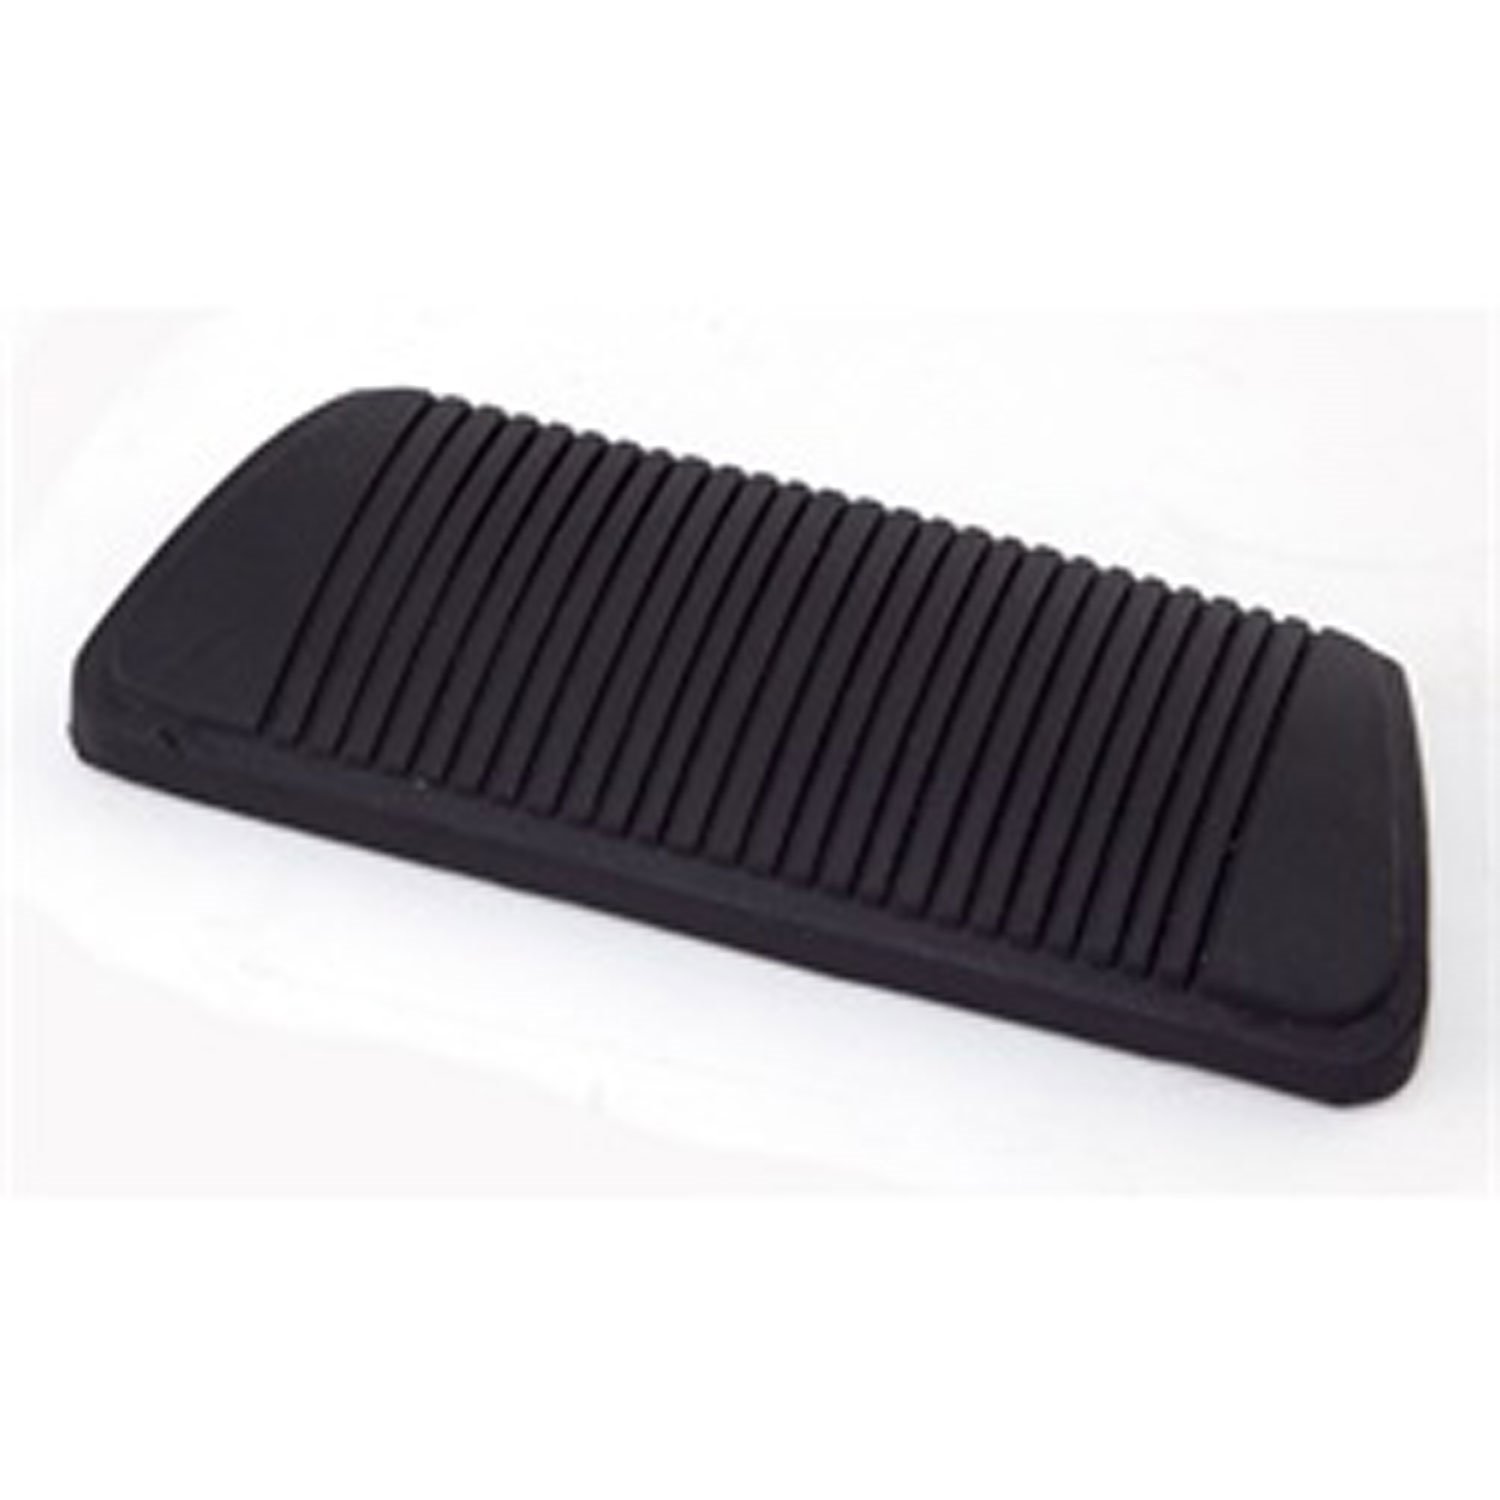 Replacement brake pedal pad from Omix-ADA, Fits 84-96 Jeep Cherokee XJ with an automatic transmission.